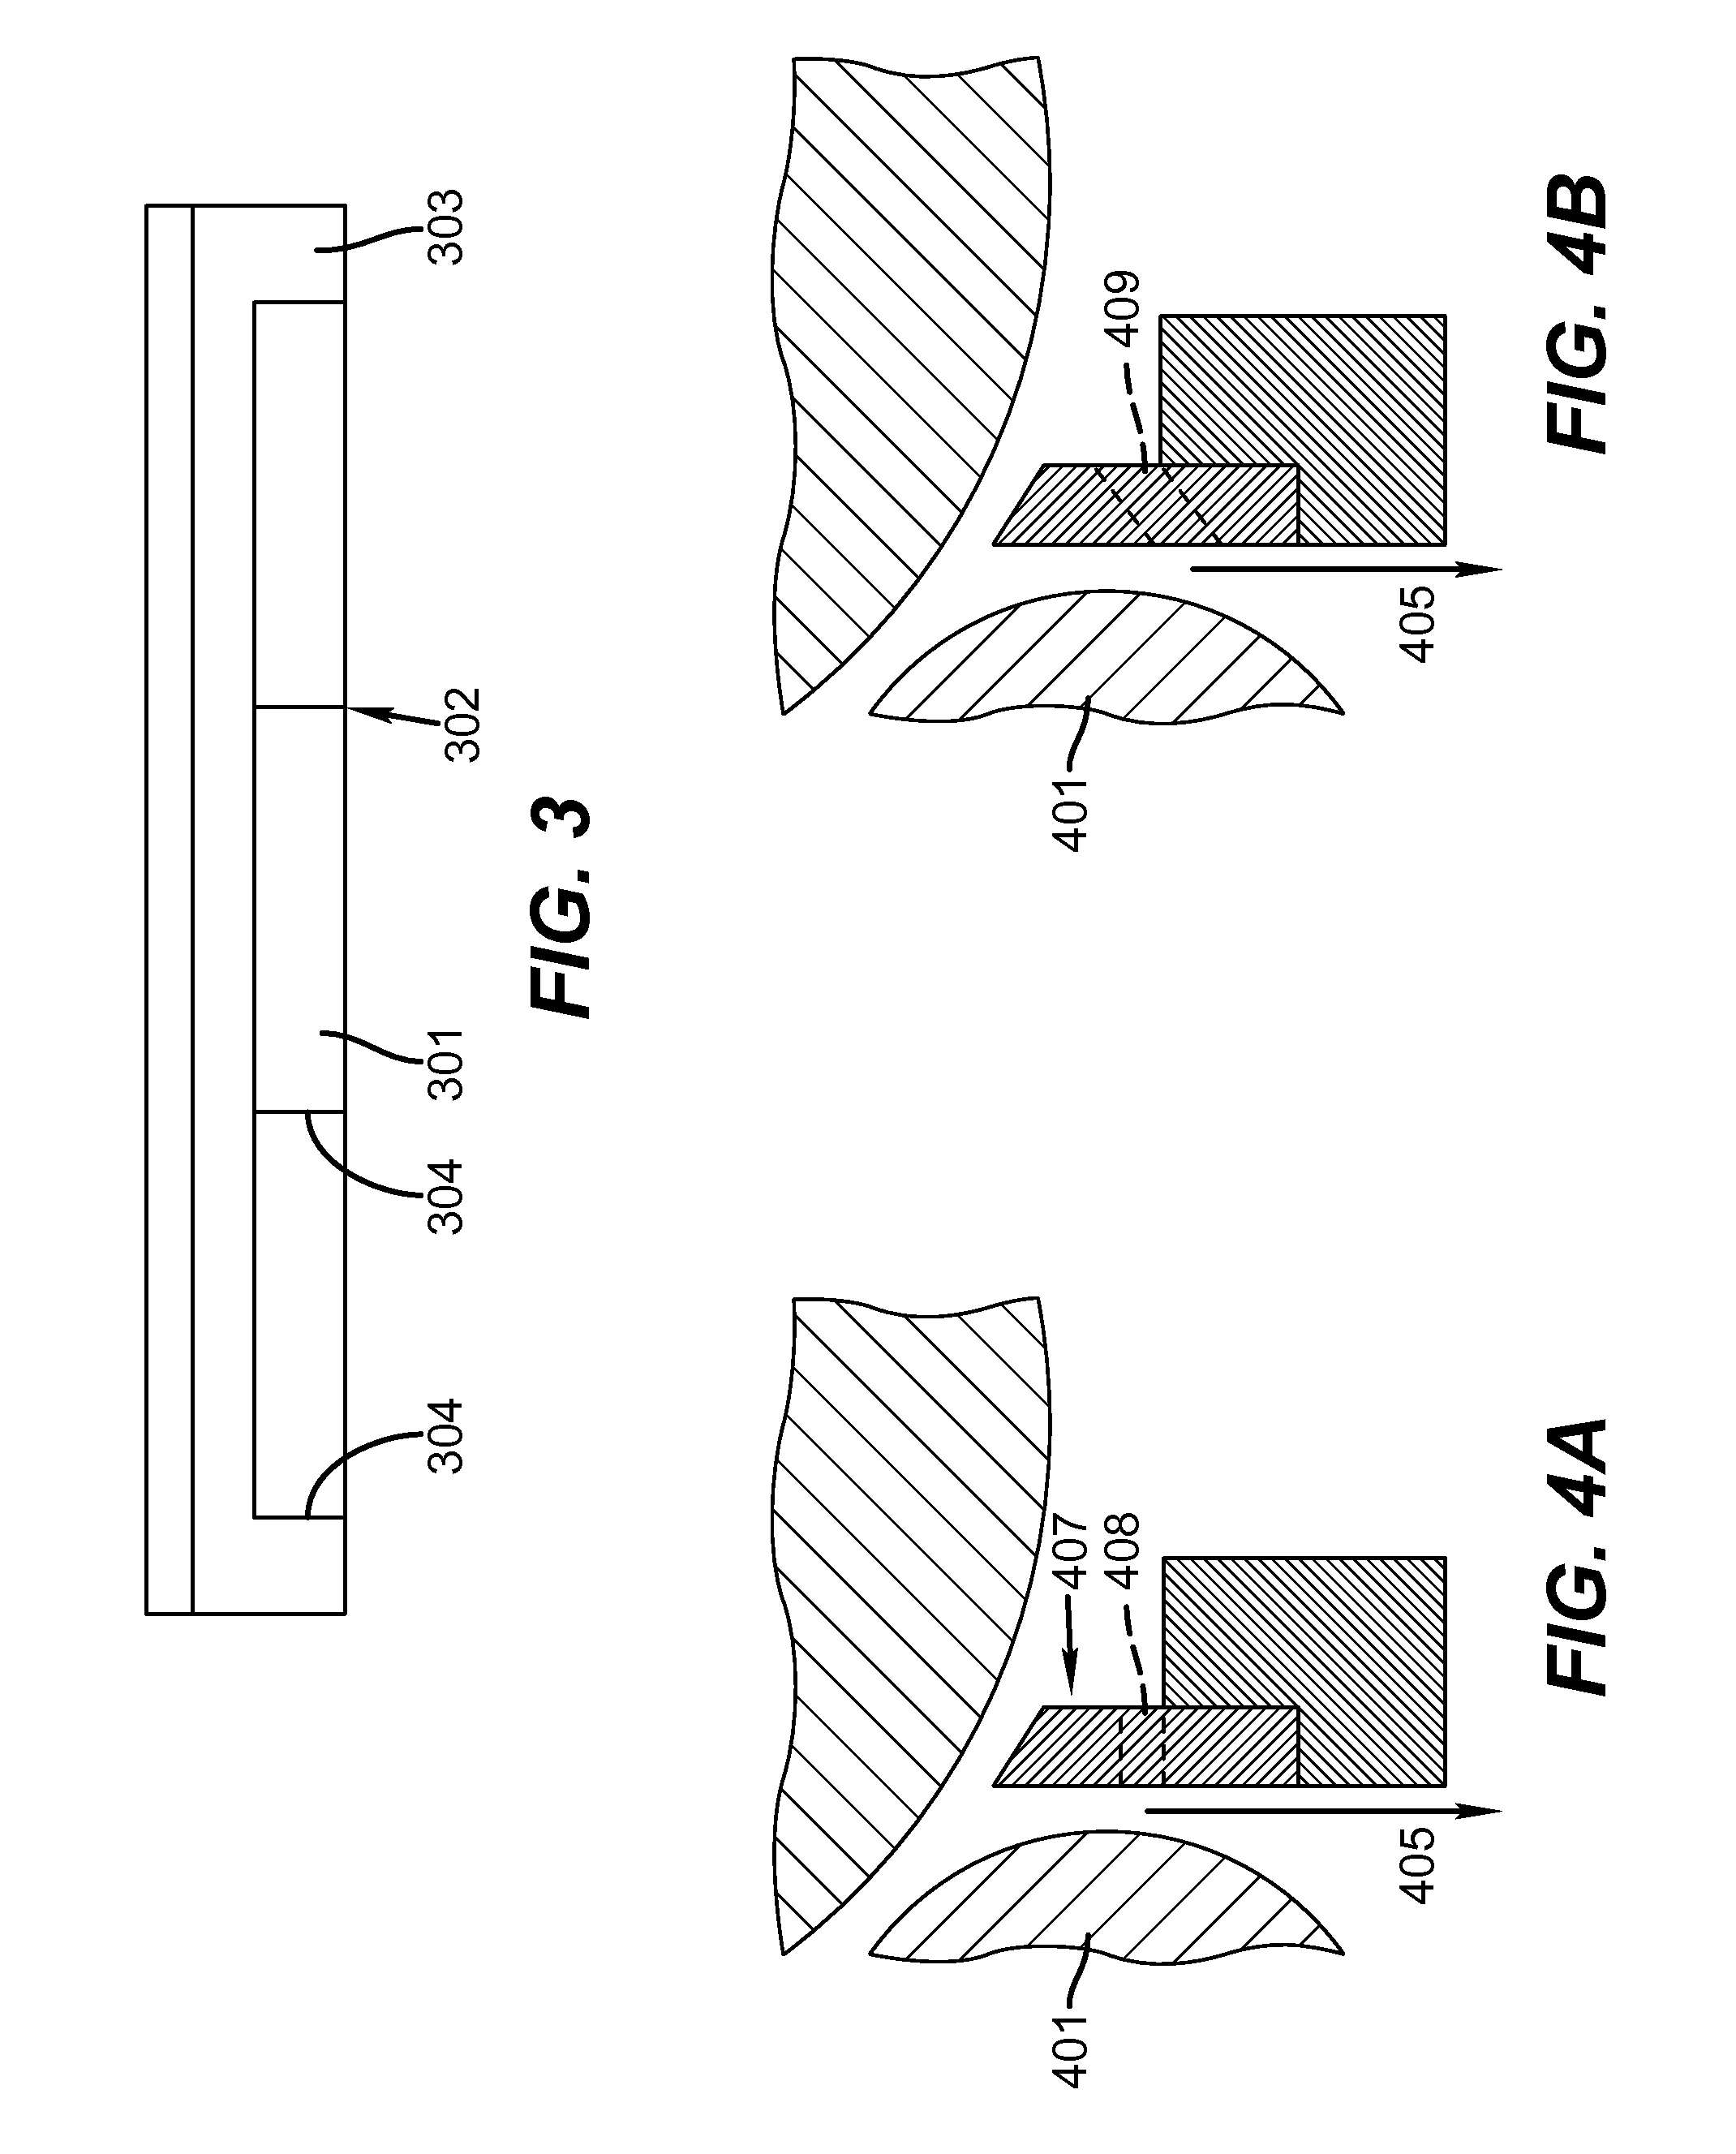 Method of implementing a magnetically actuated flap seal